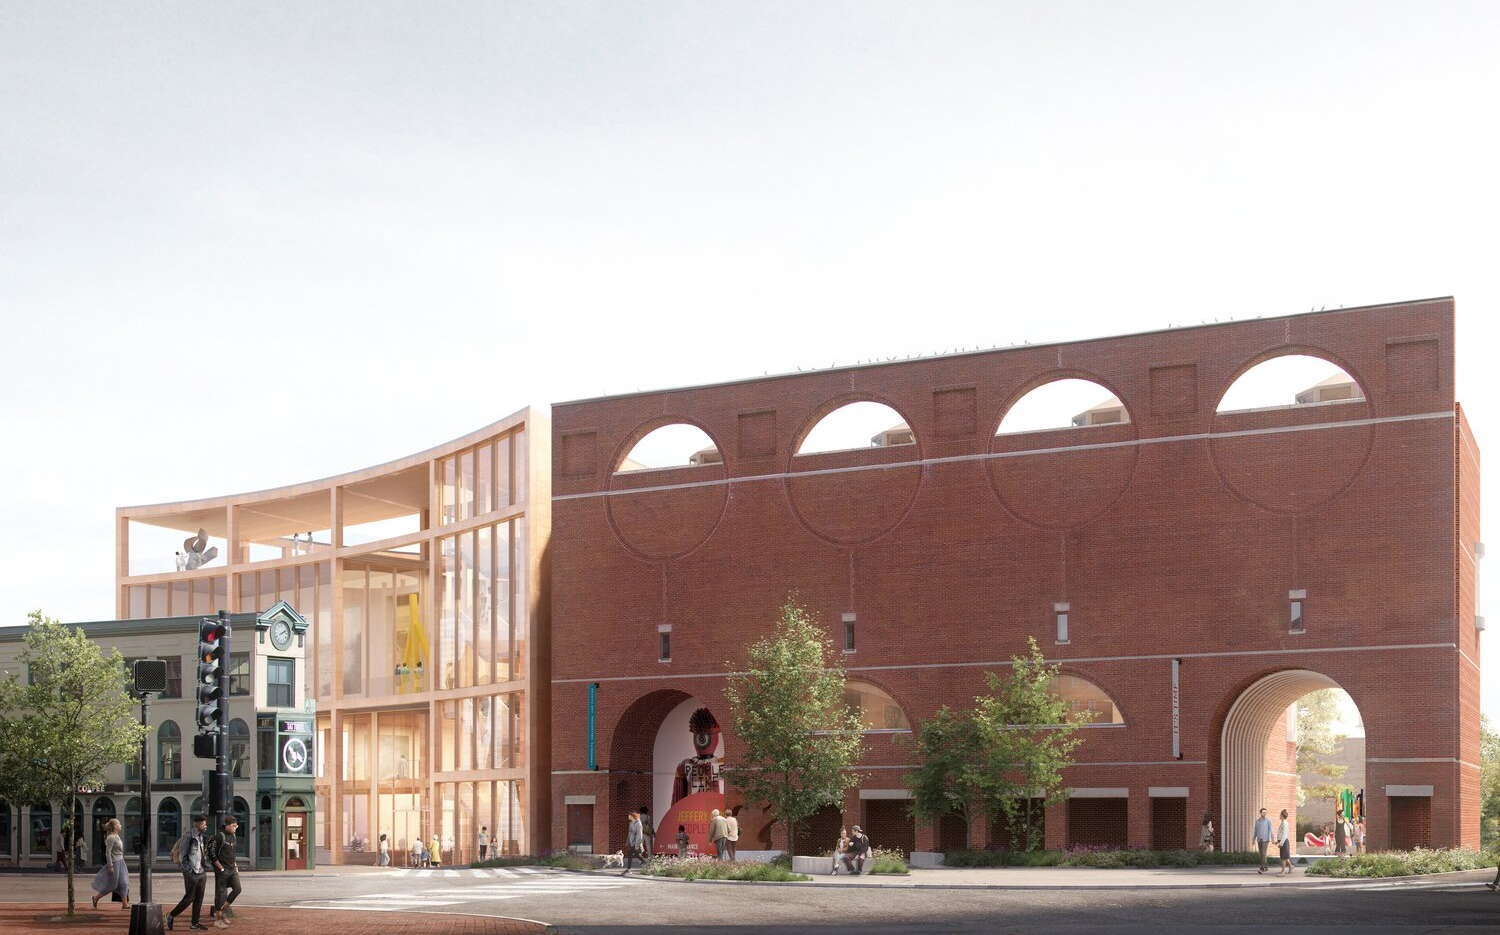 rendering of big brick building with arches